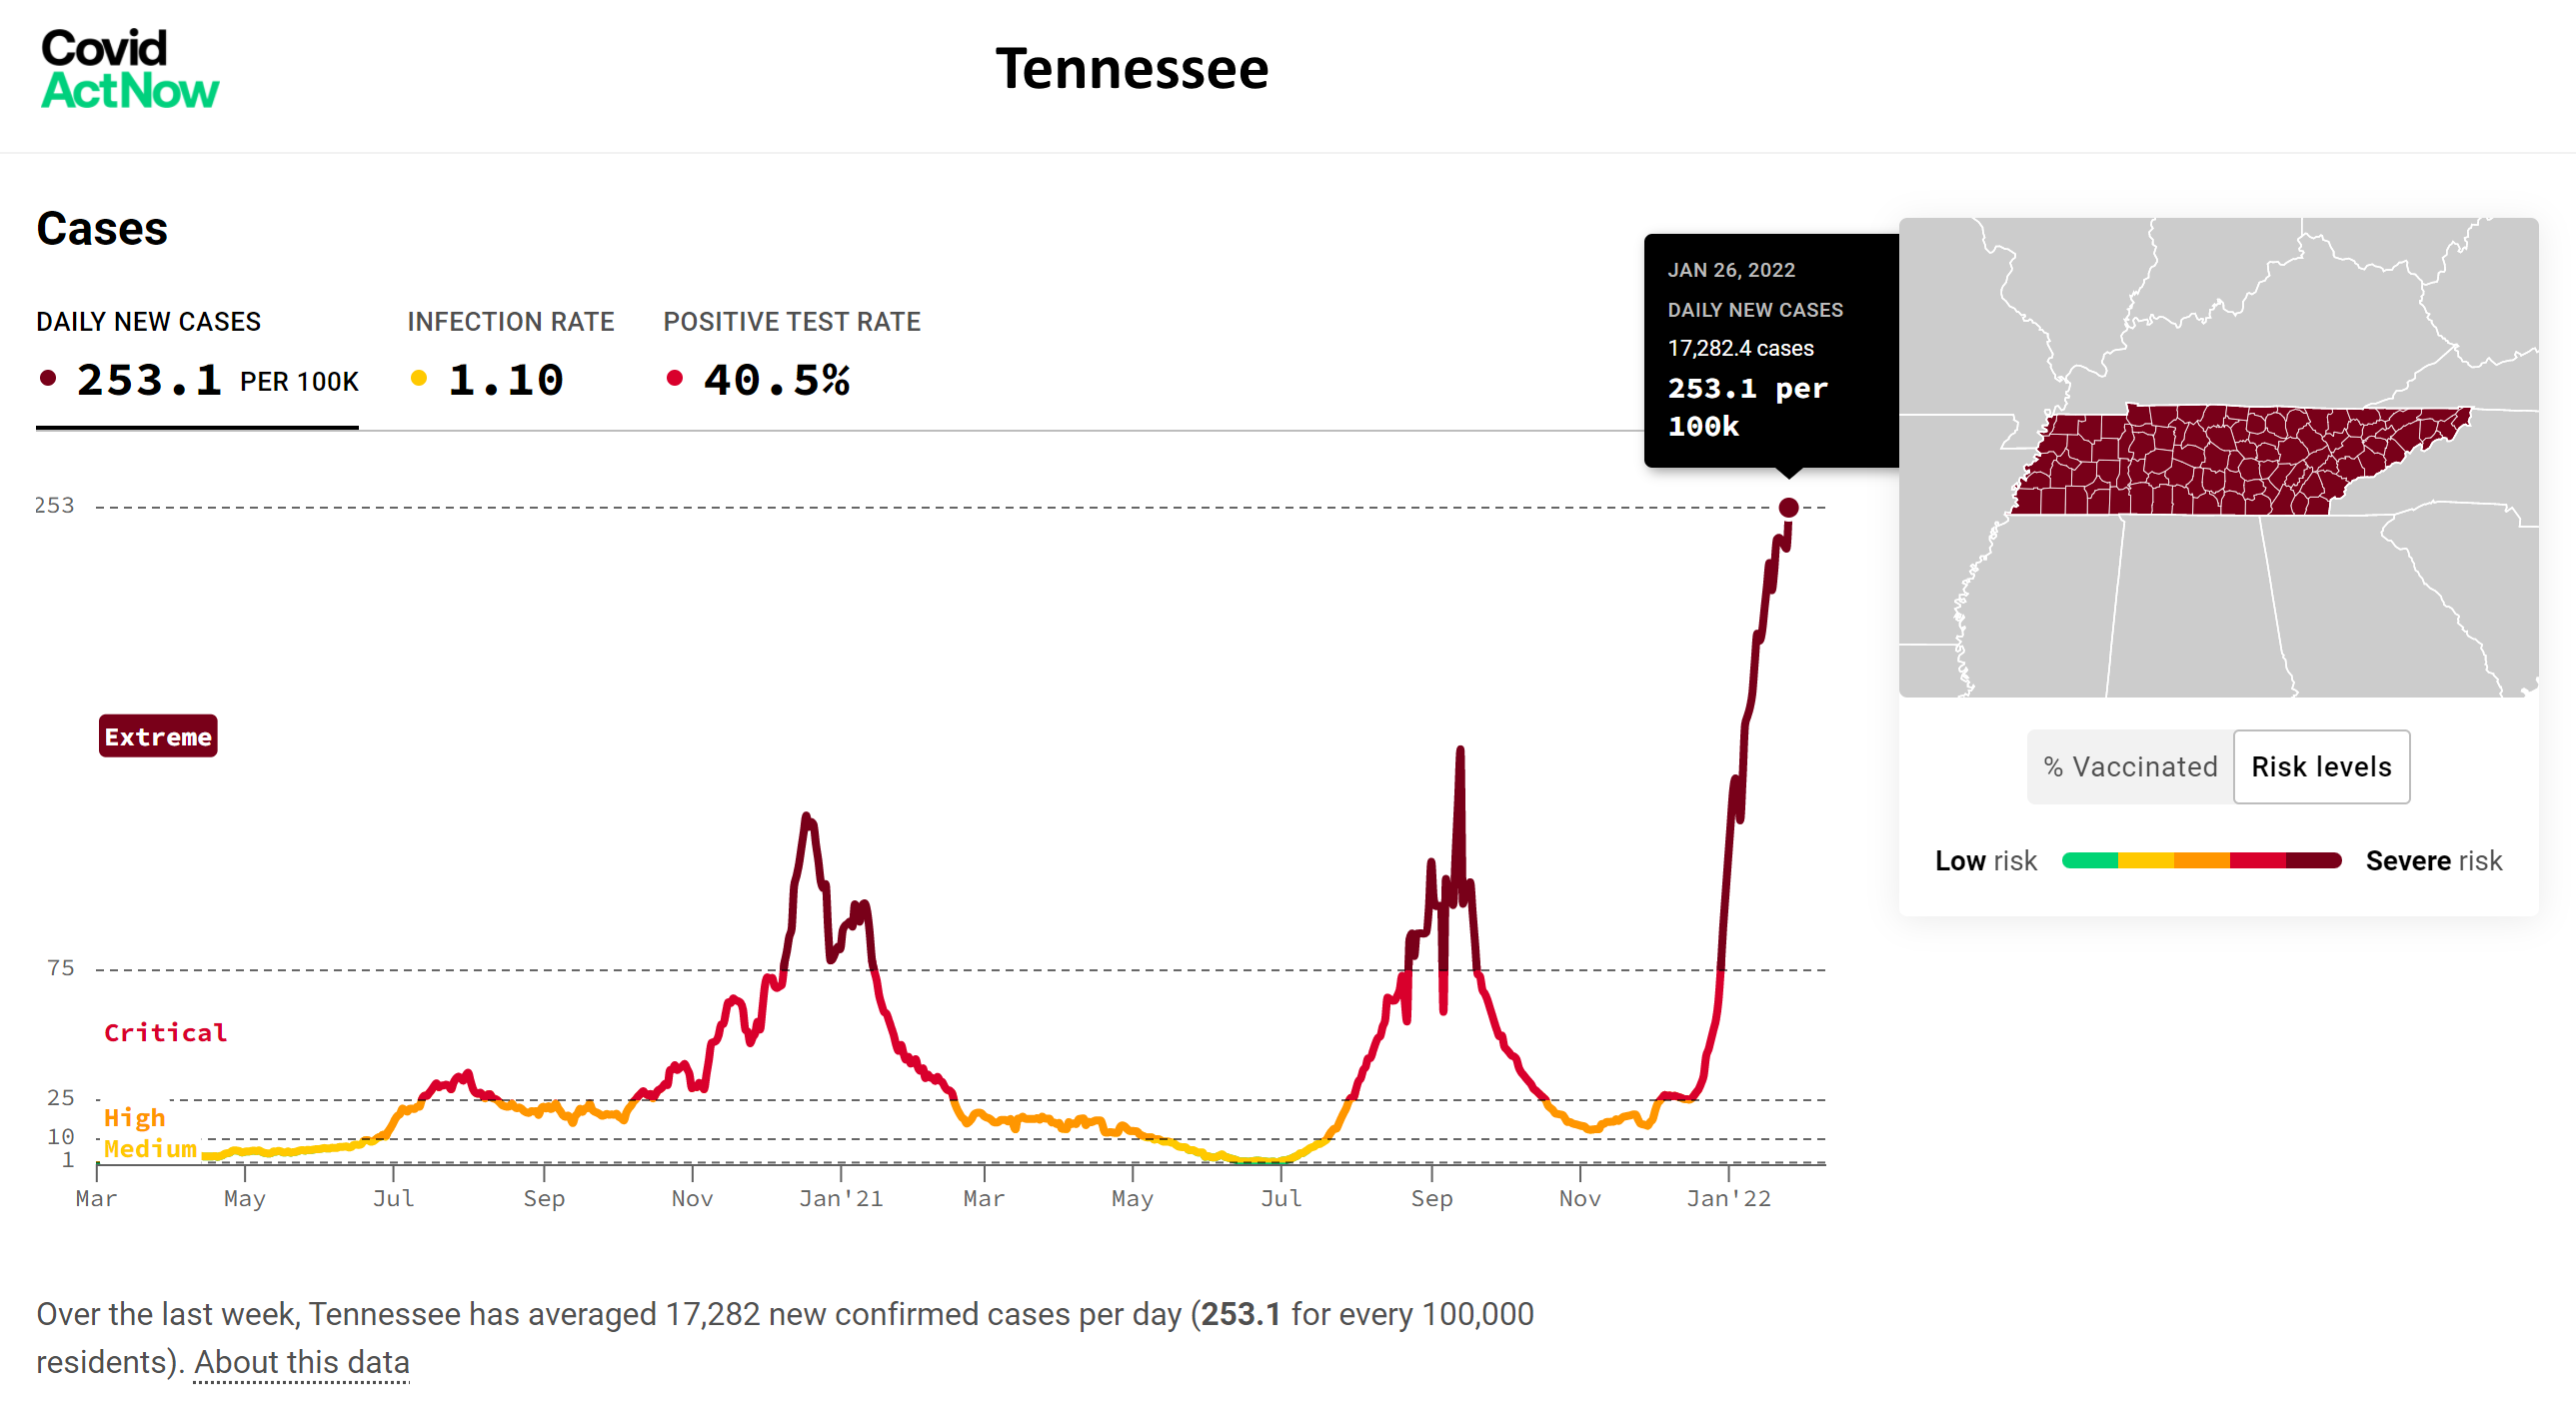 COVID-19 daily cases per 100,000 people in Tennessee, 26 January 2022. Graphic: Covid Act Now